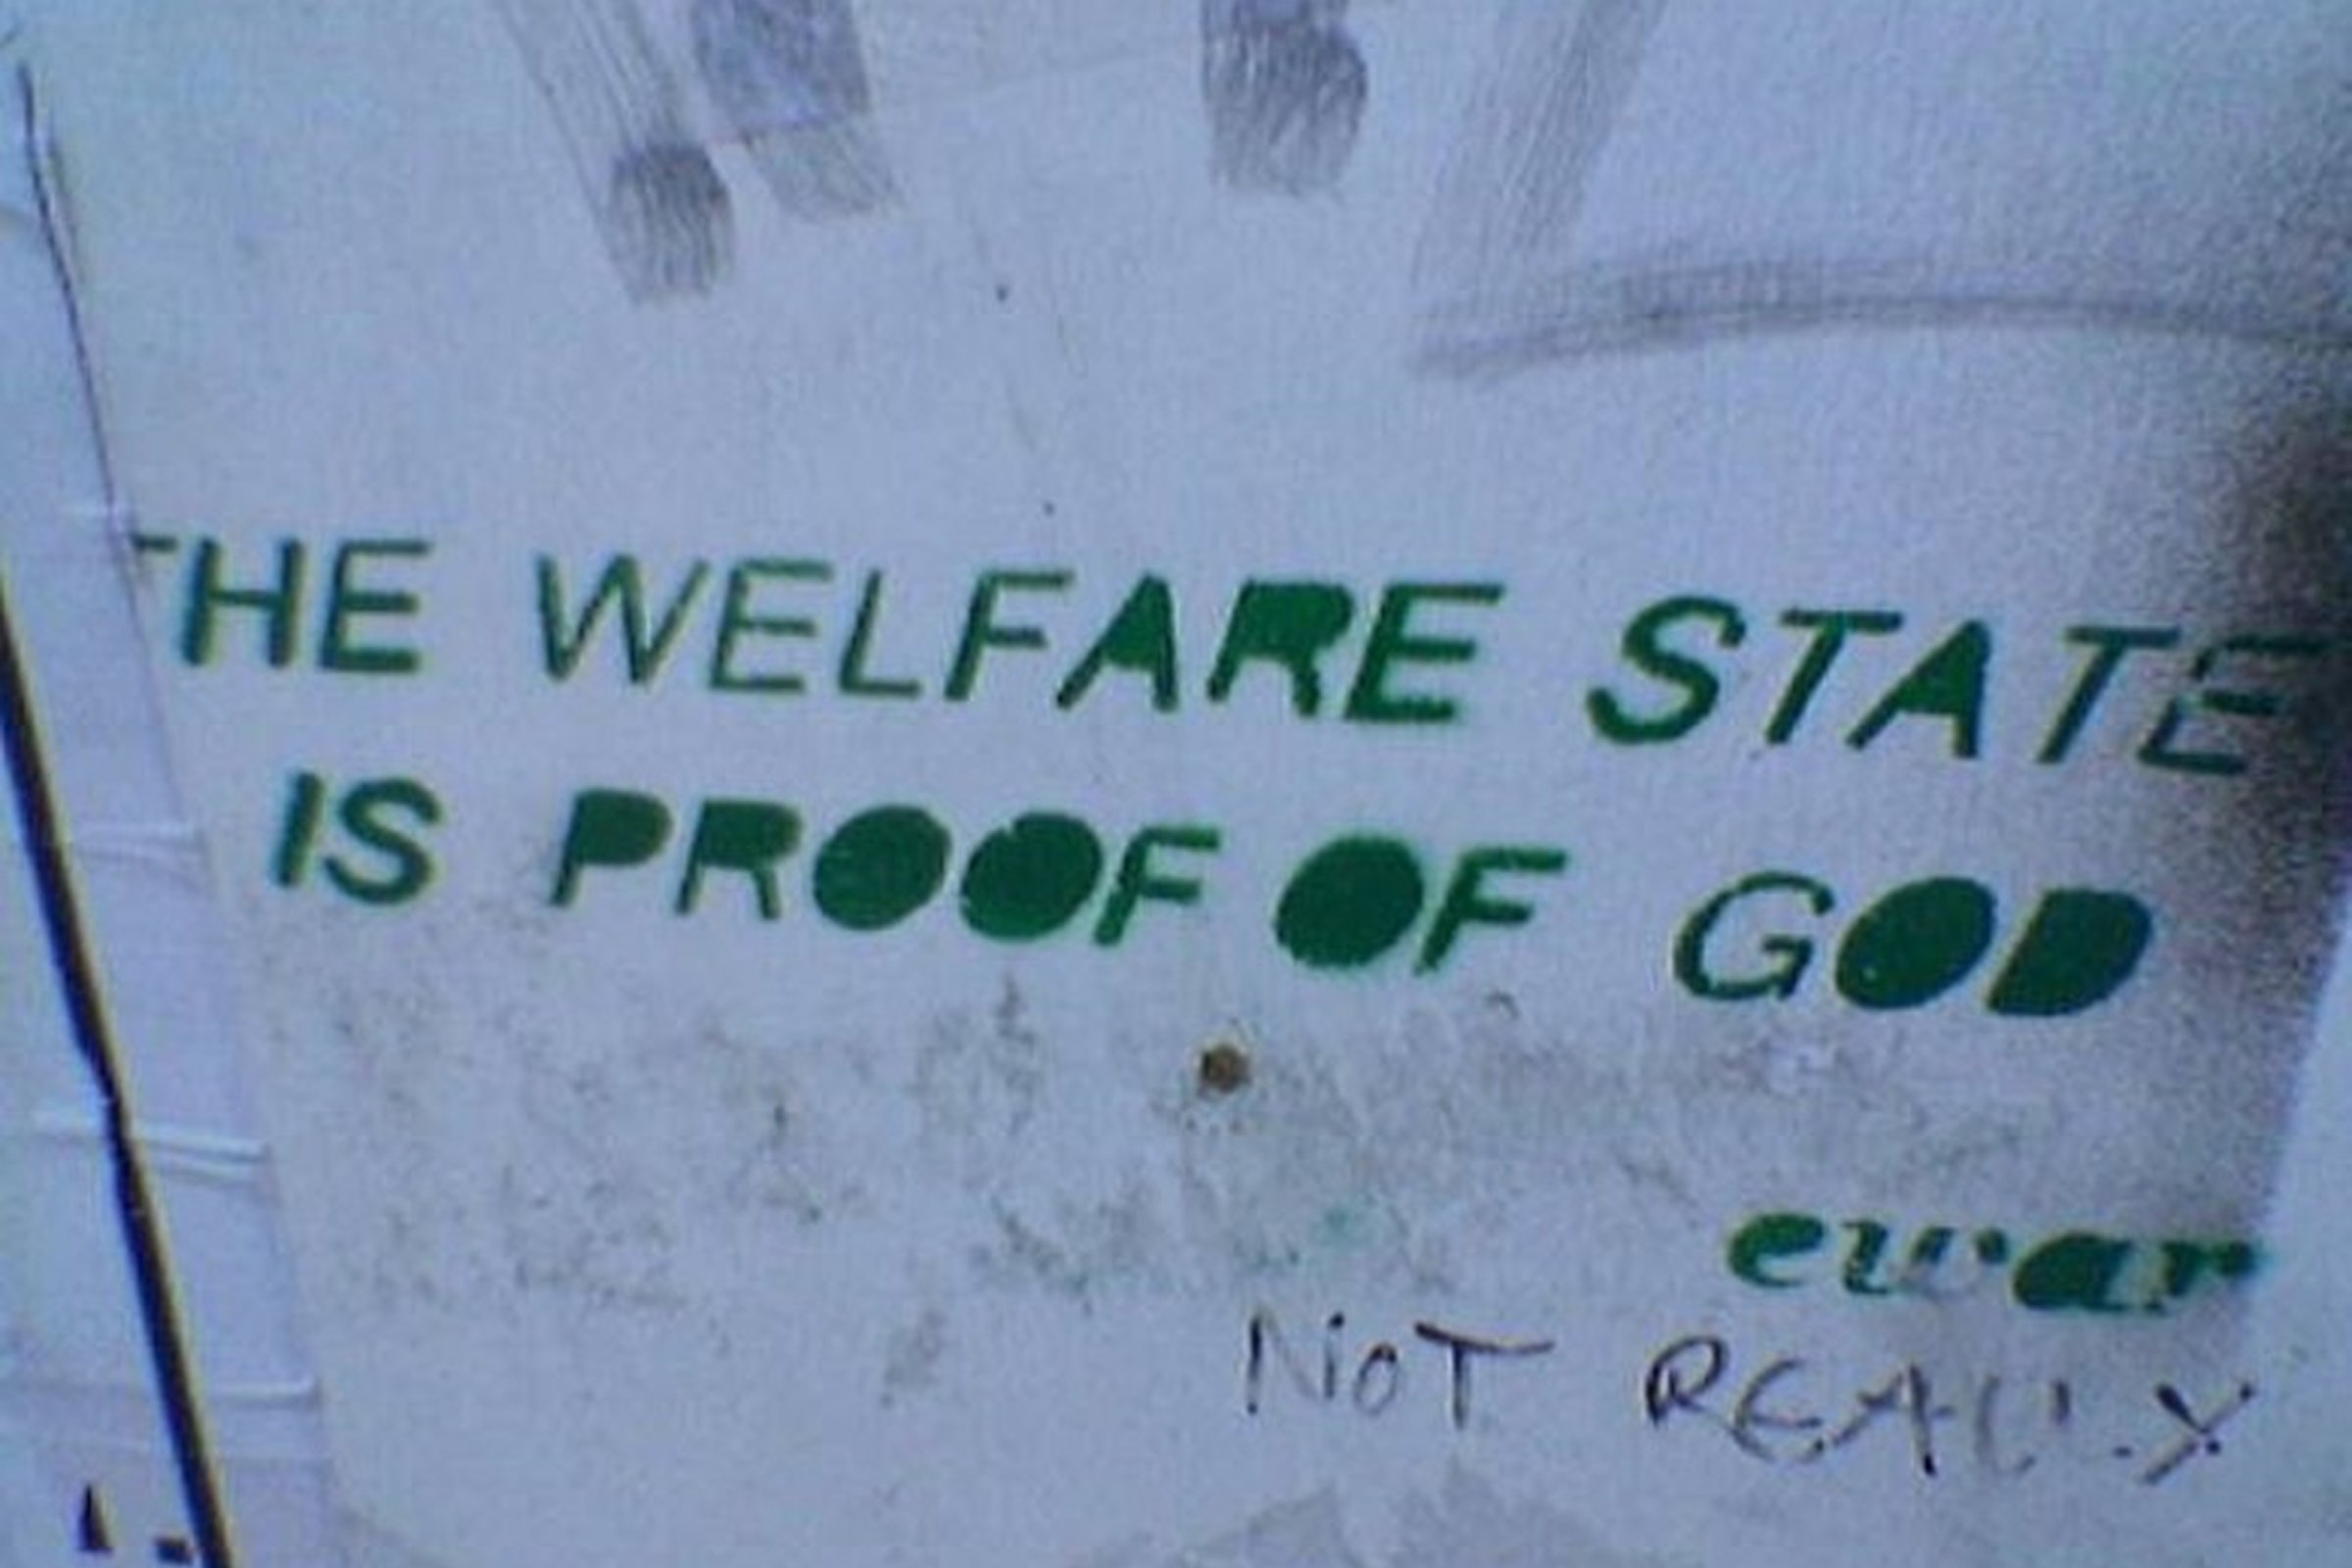 Christianity and the future of Welfare